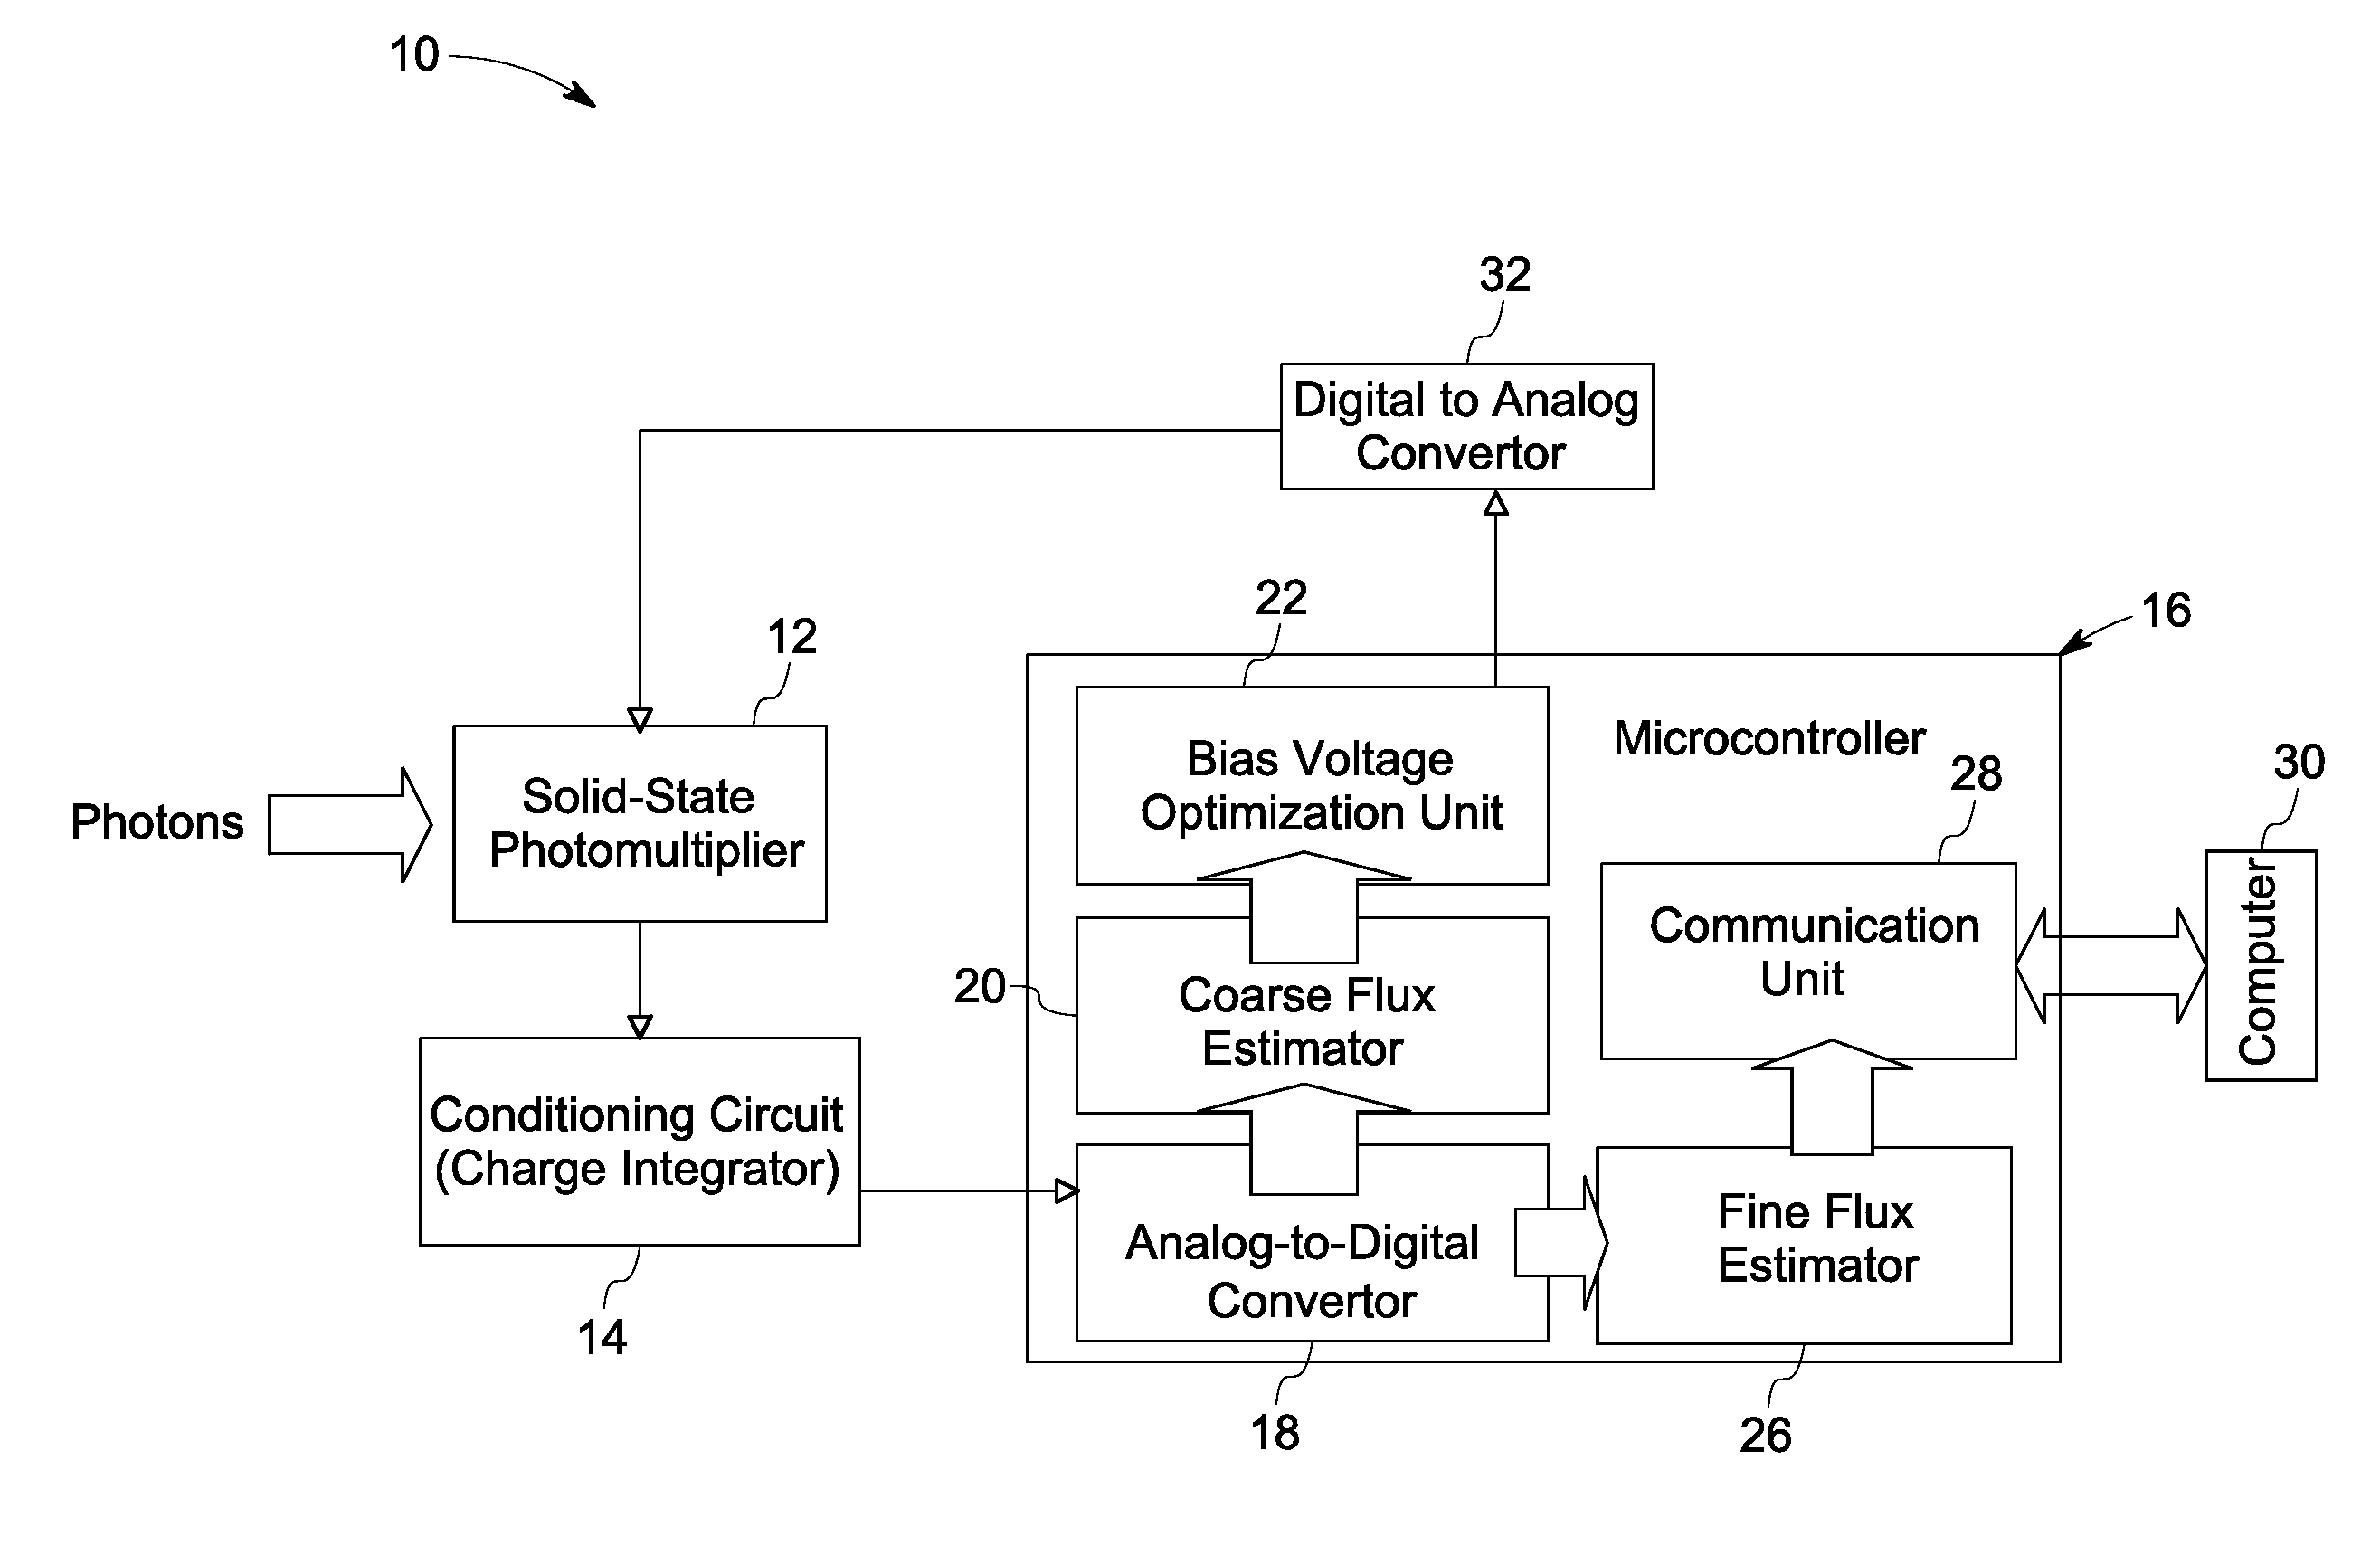 Solid-state photomultiplier module with improved signal-to-noise ratio